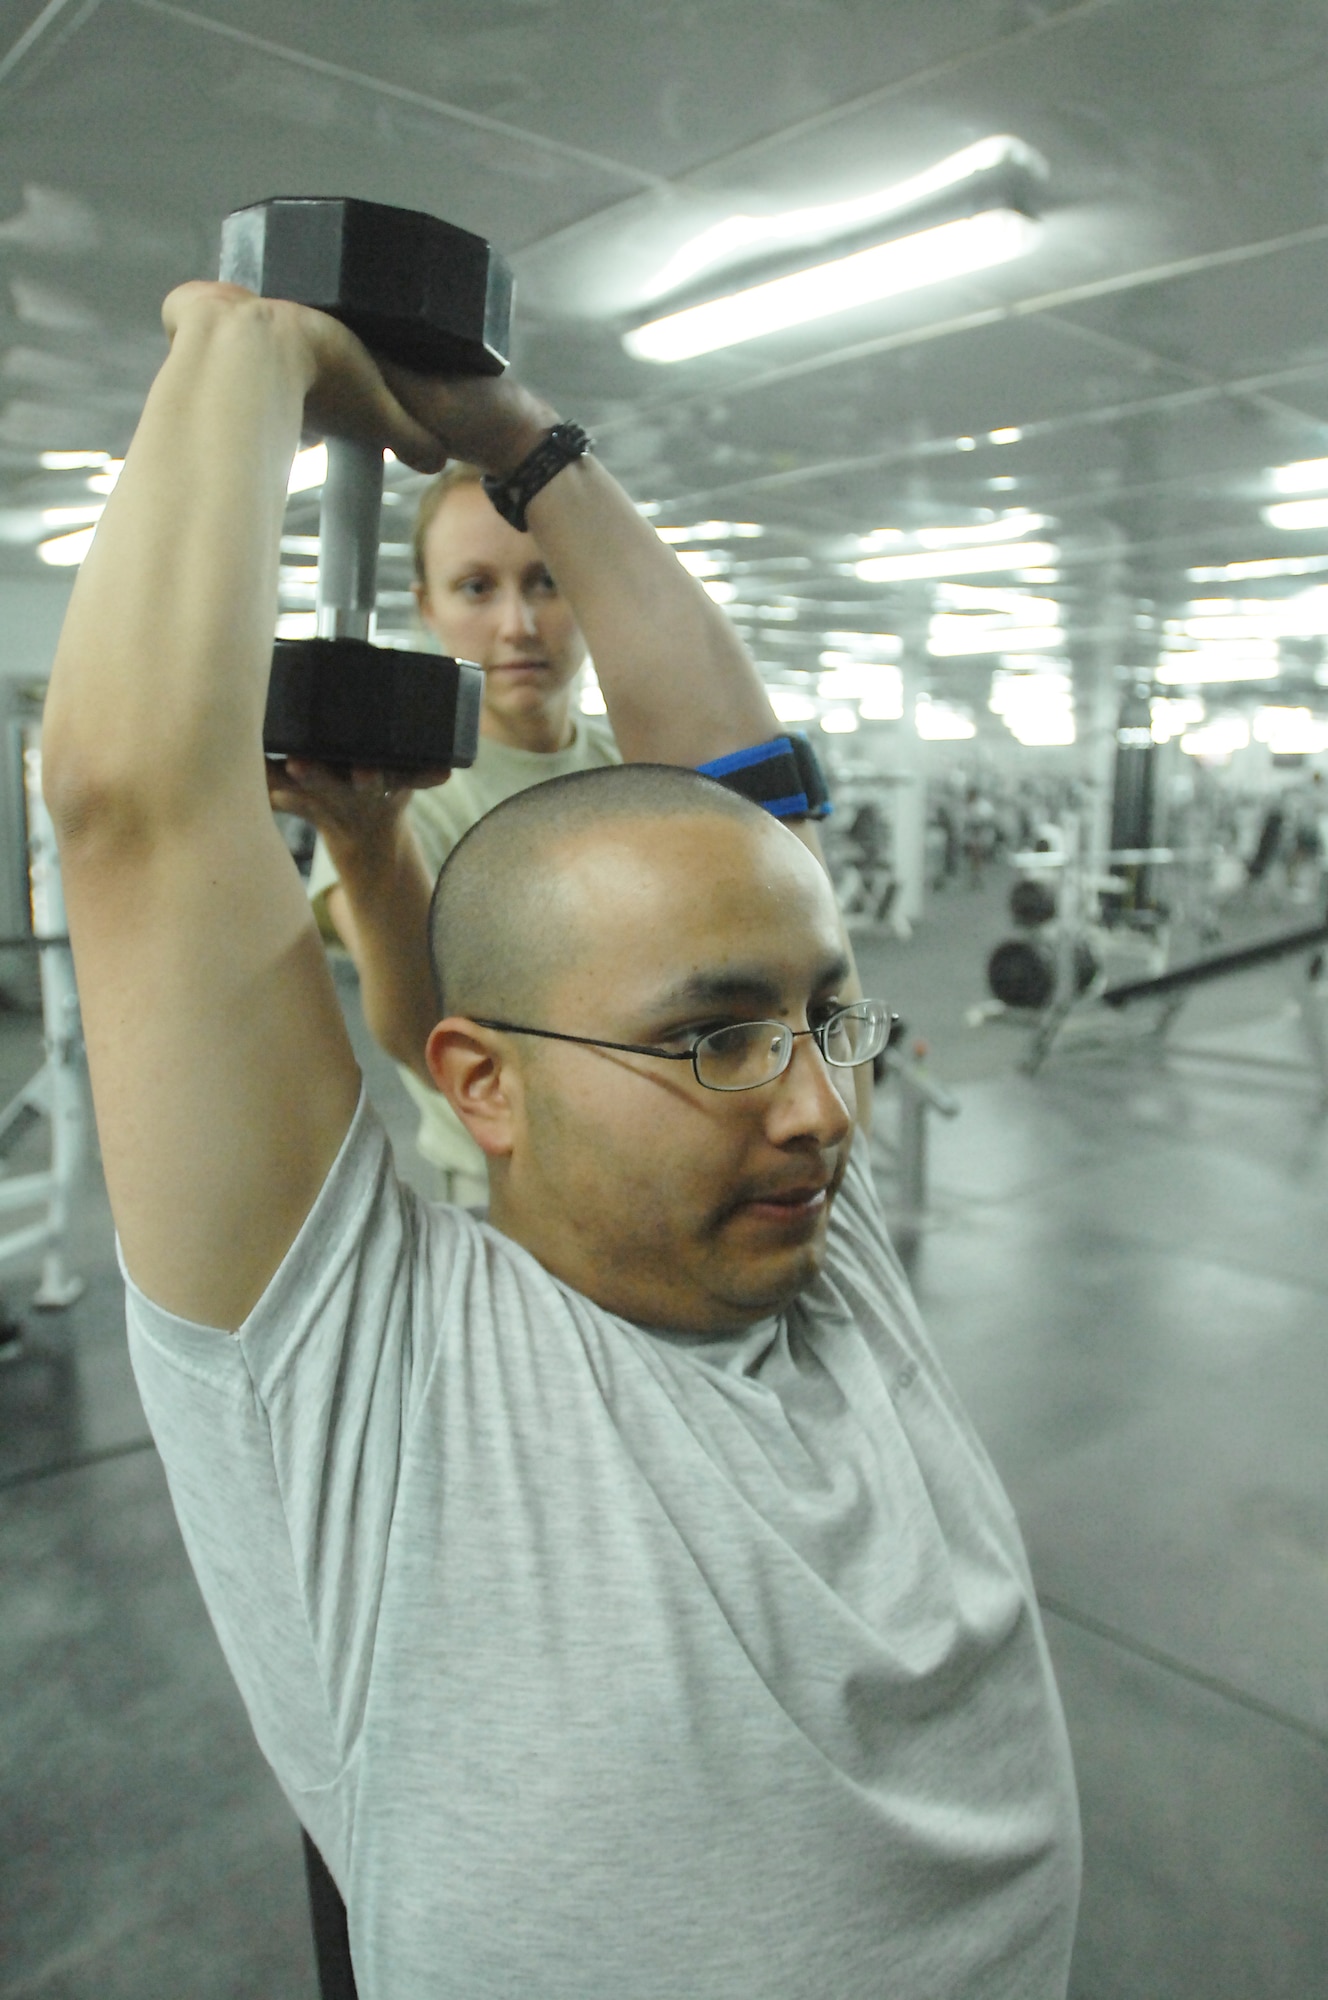 Deployed Airman helps others' fitness plans take shape > U.S. Air Forces  Central > Display